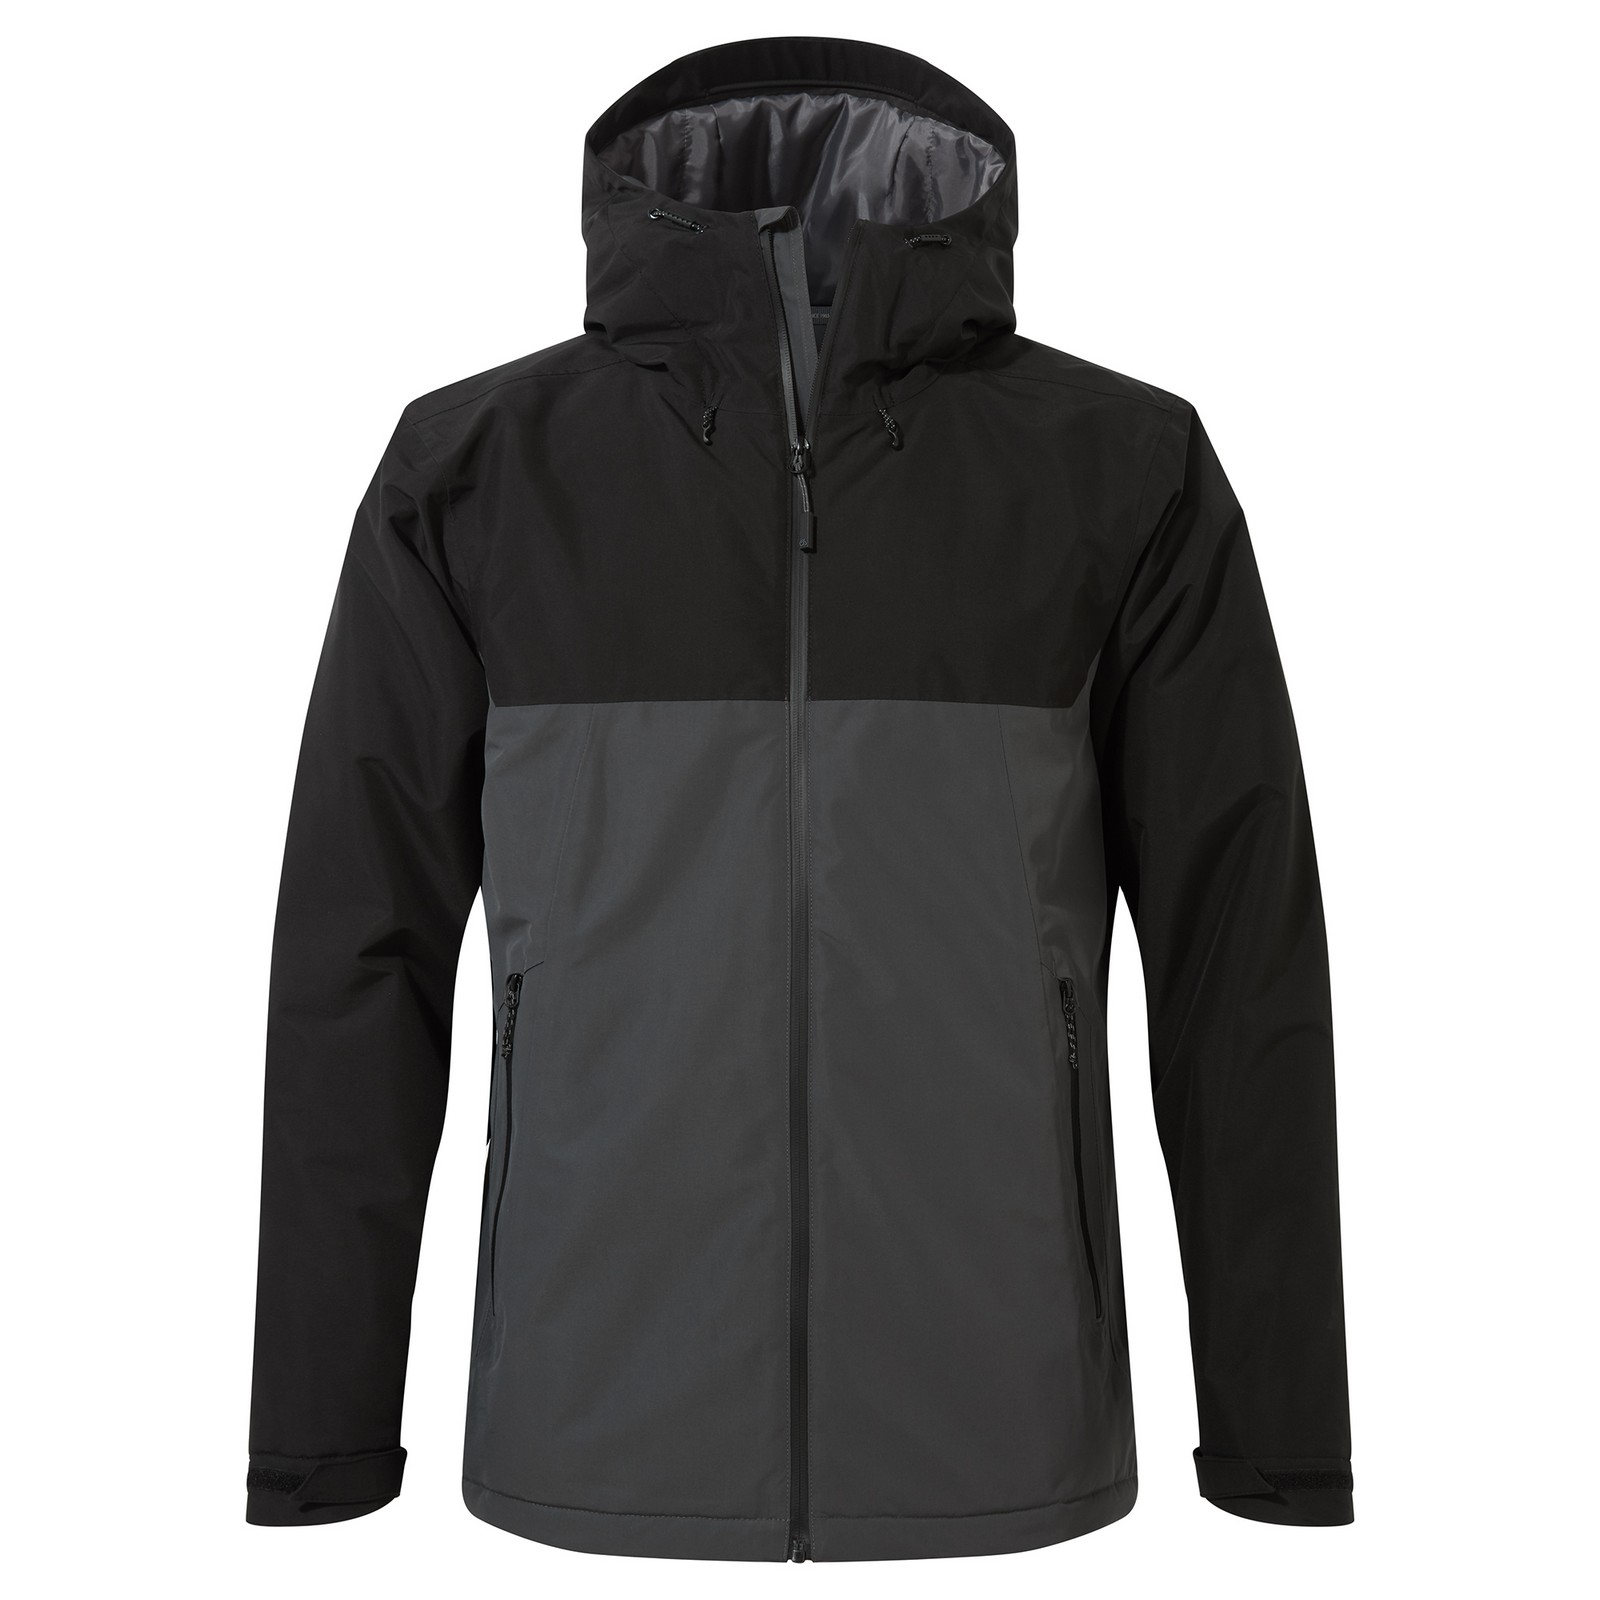 Craghoppers Kiwi Thermic insulated jacket | WISE Worksafe